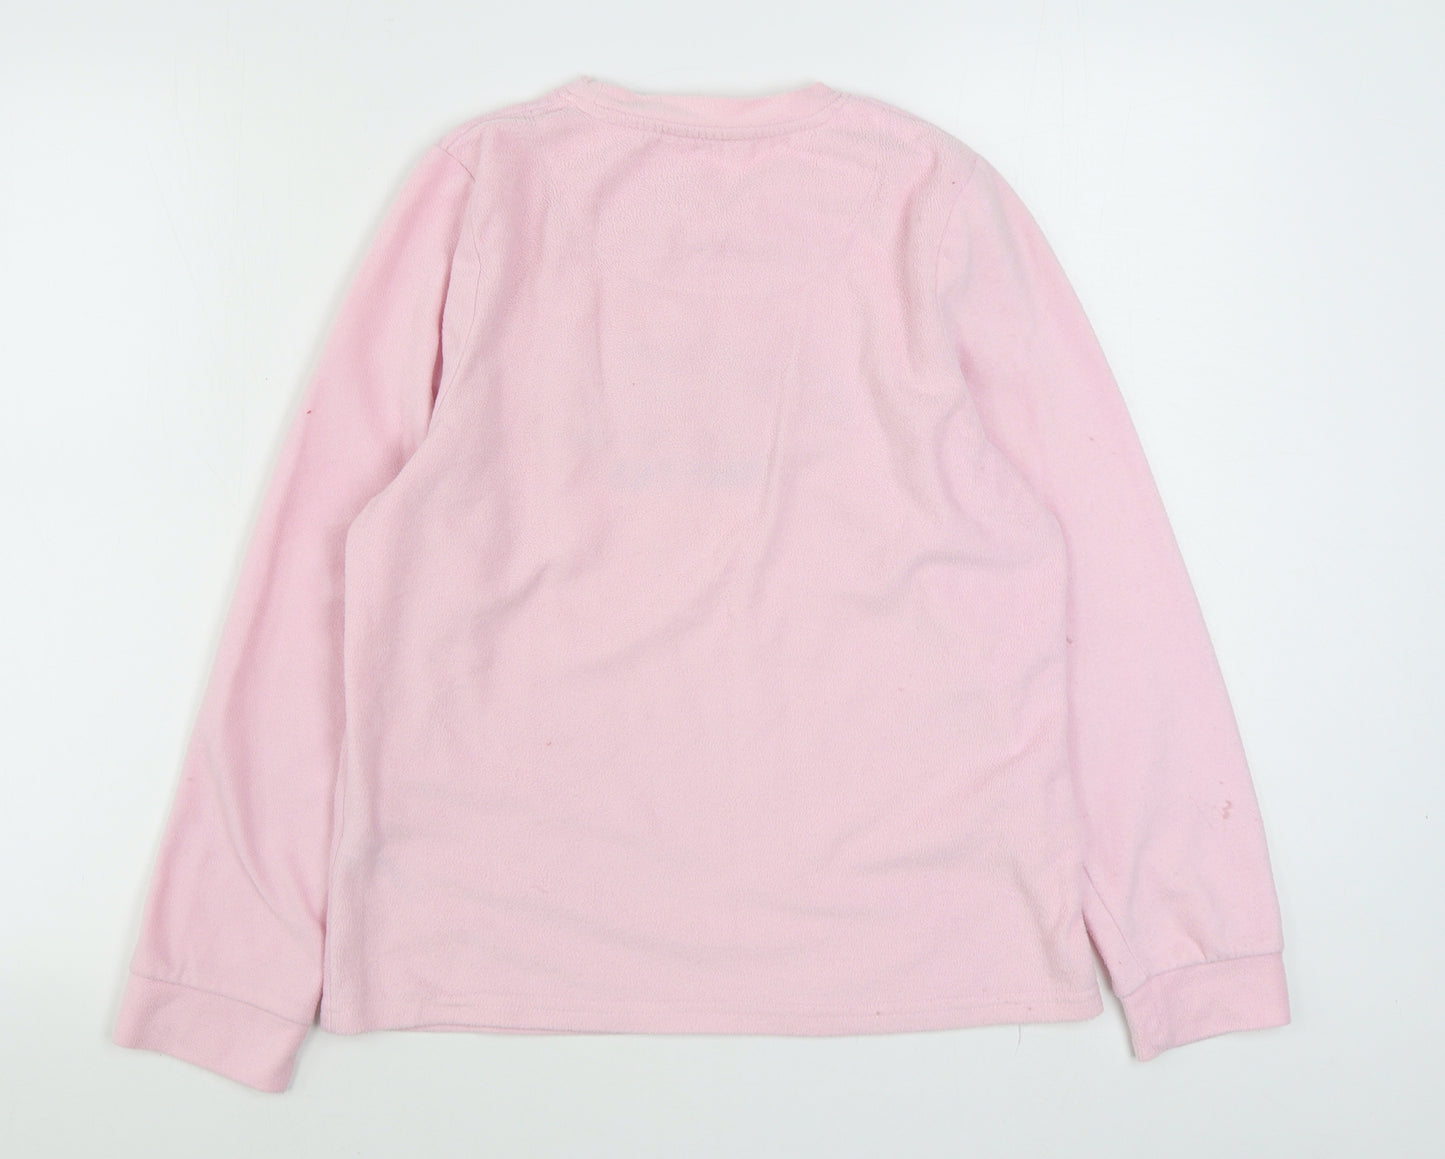 Dunnes Stores Womens Pink Solid Polyester Top Pyjama Top Size S